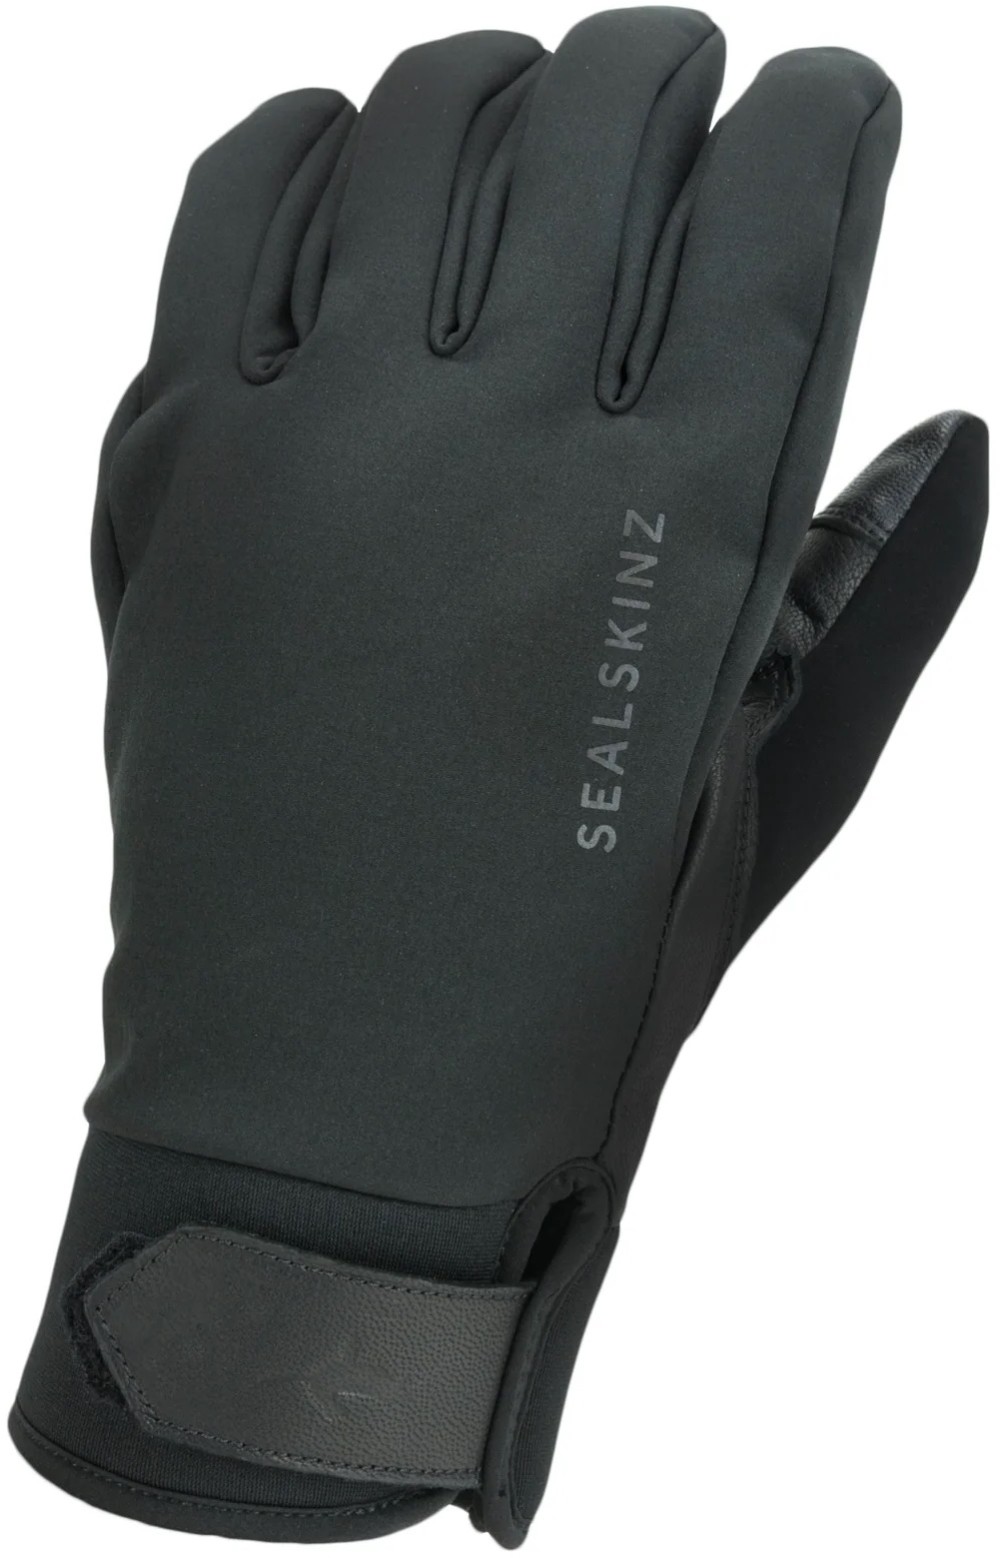 Kelling Waterproof All Weather Insulated Long Finger Cycle Gloves image 0